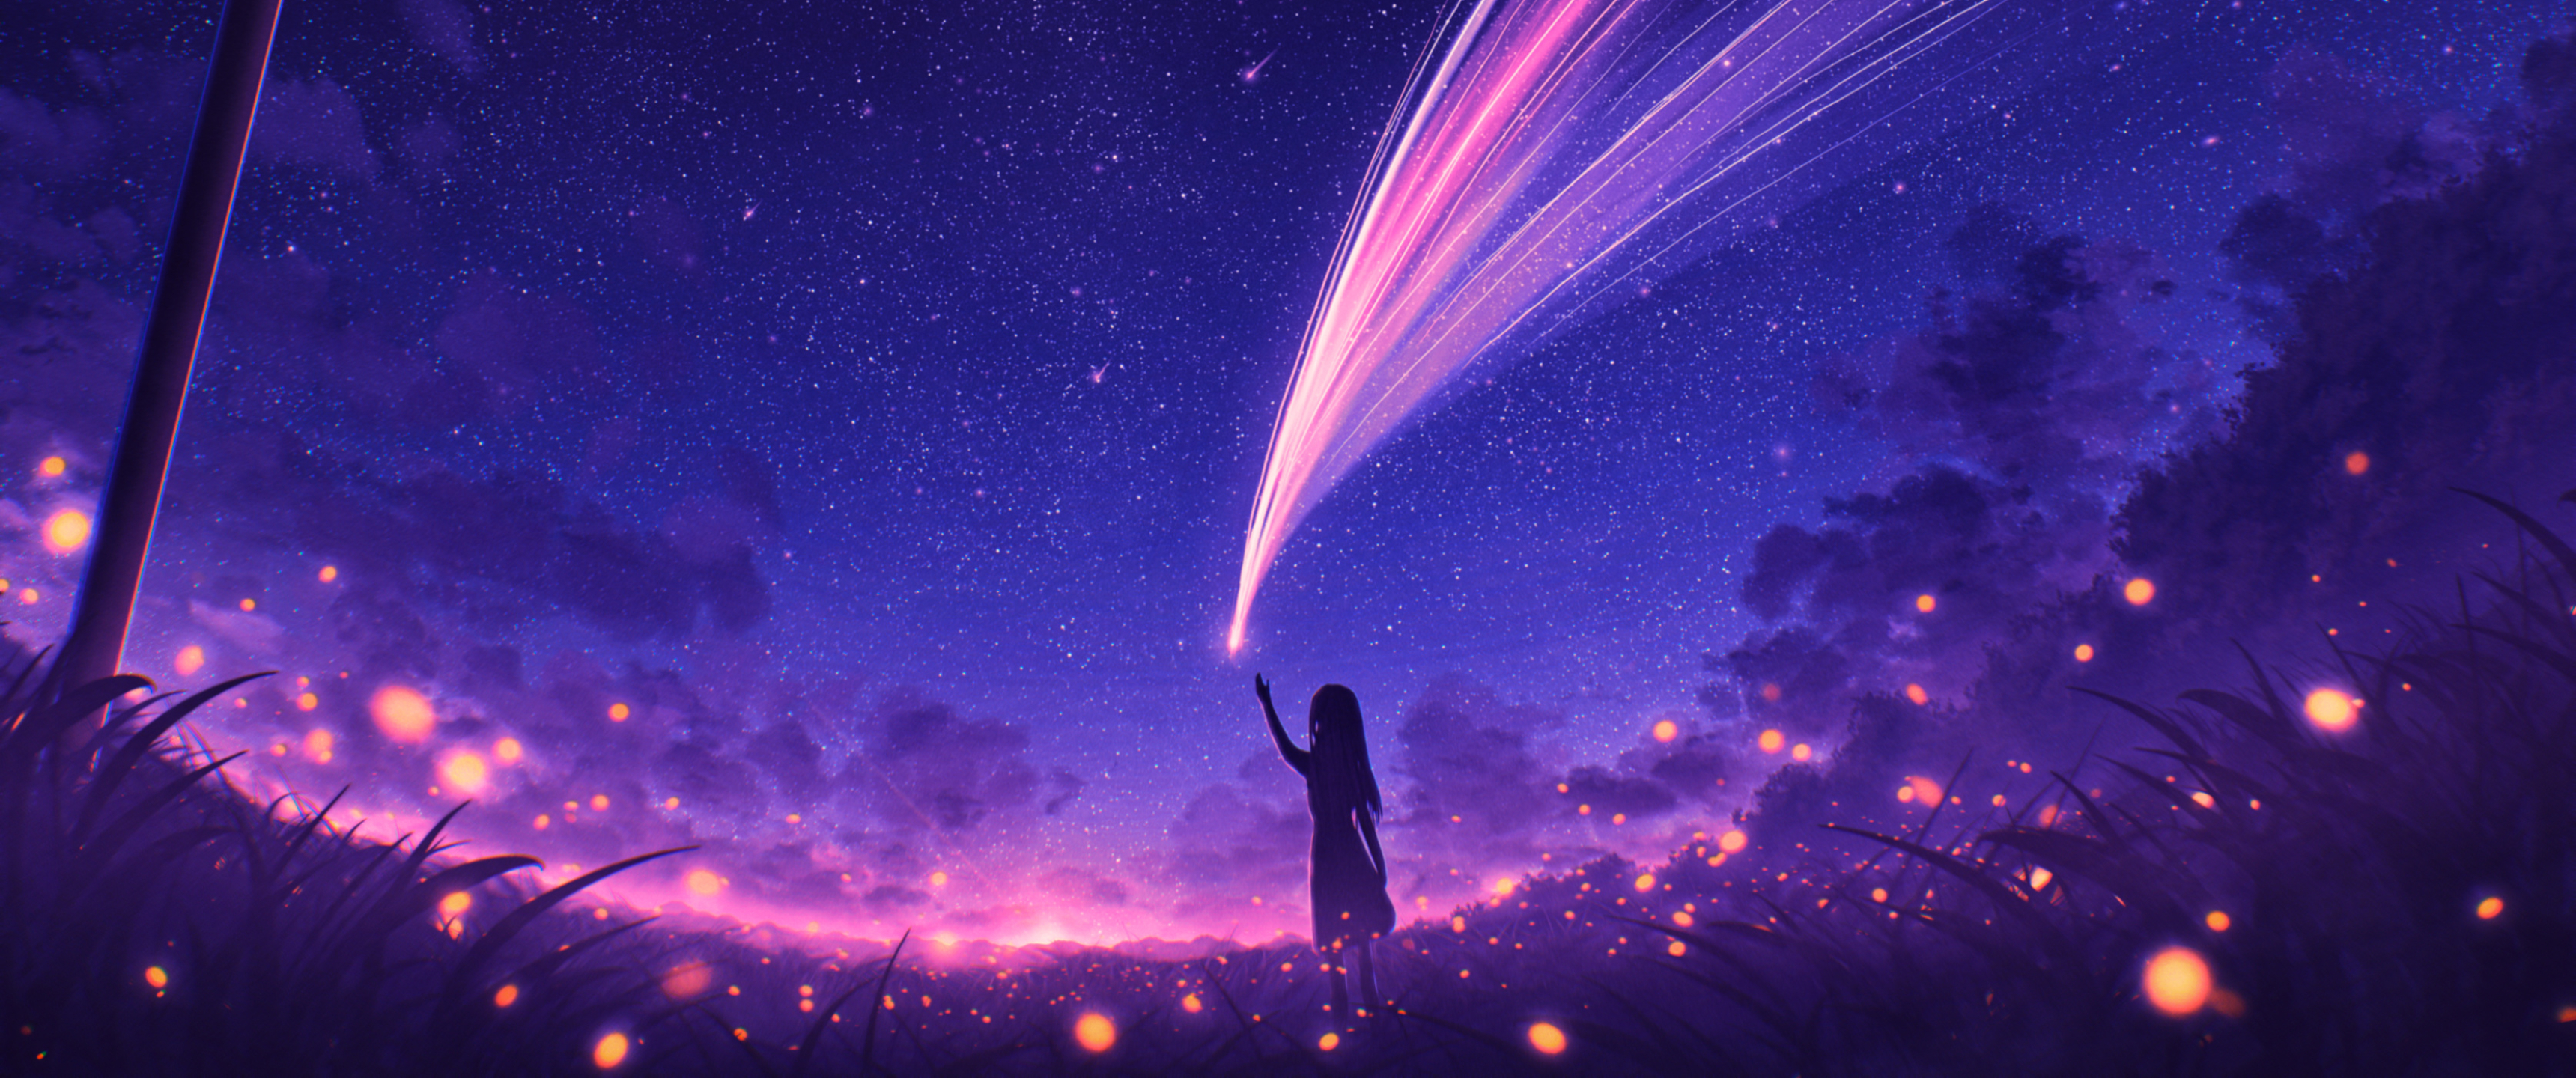 3440x1440 Resolution Anime Girl and Cool Starry Sky 3440x1440 Resolution  Wallpaper - Wallpapers Den